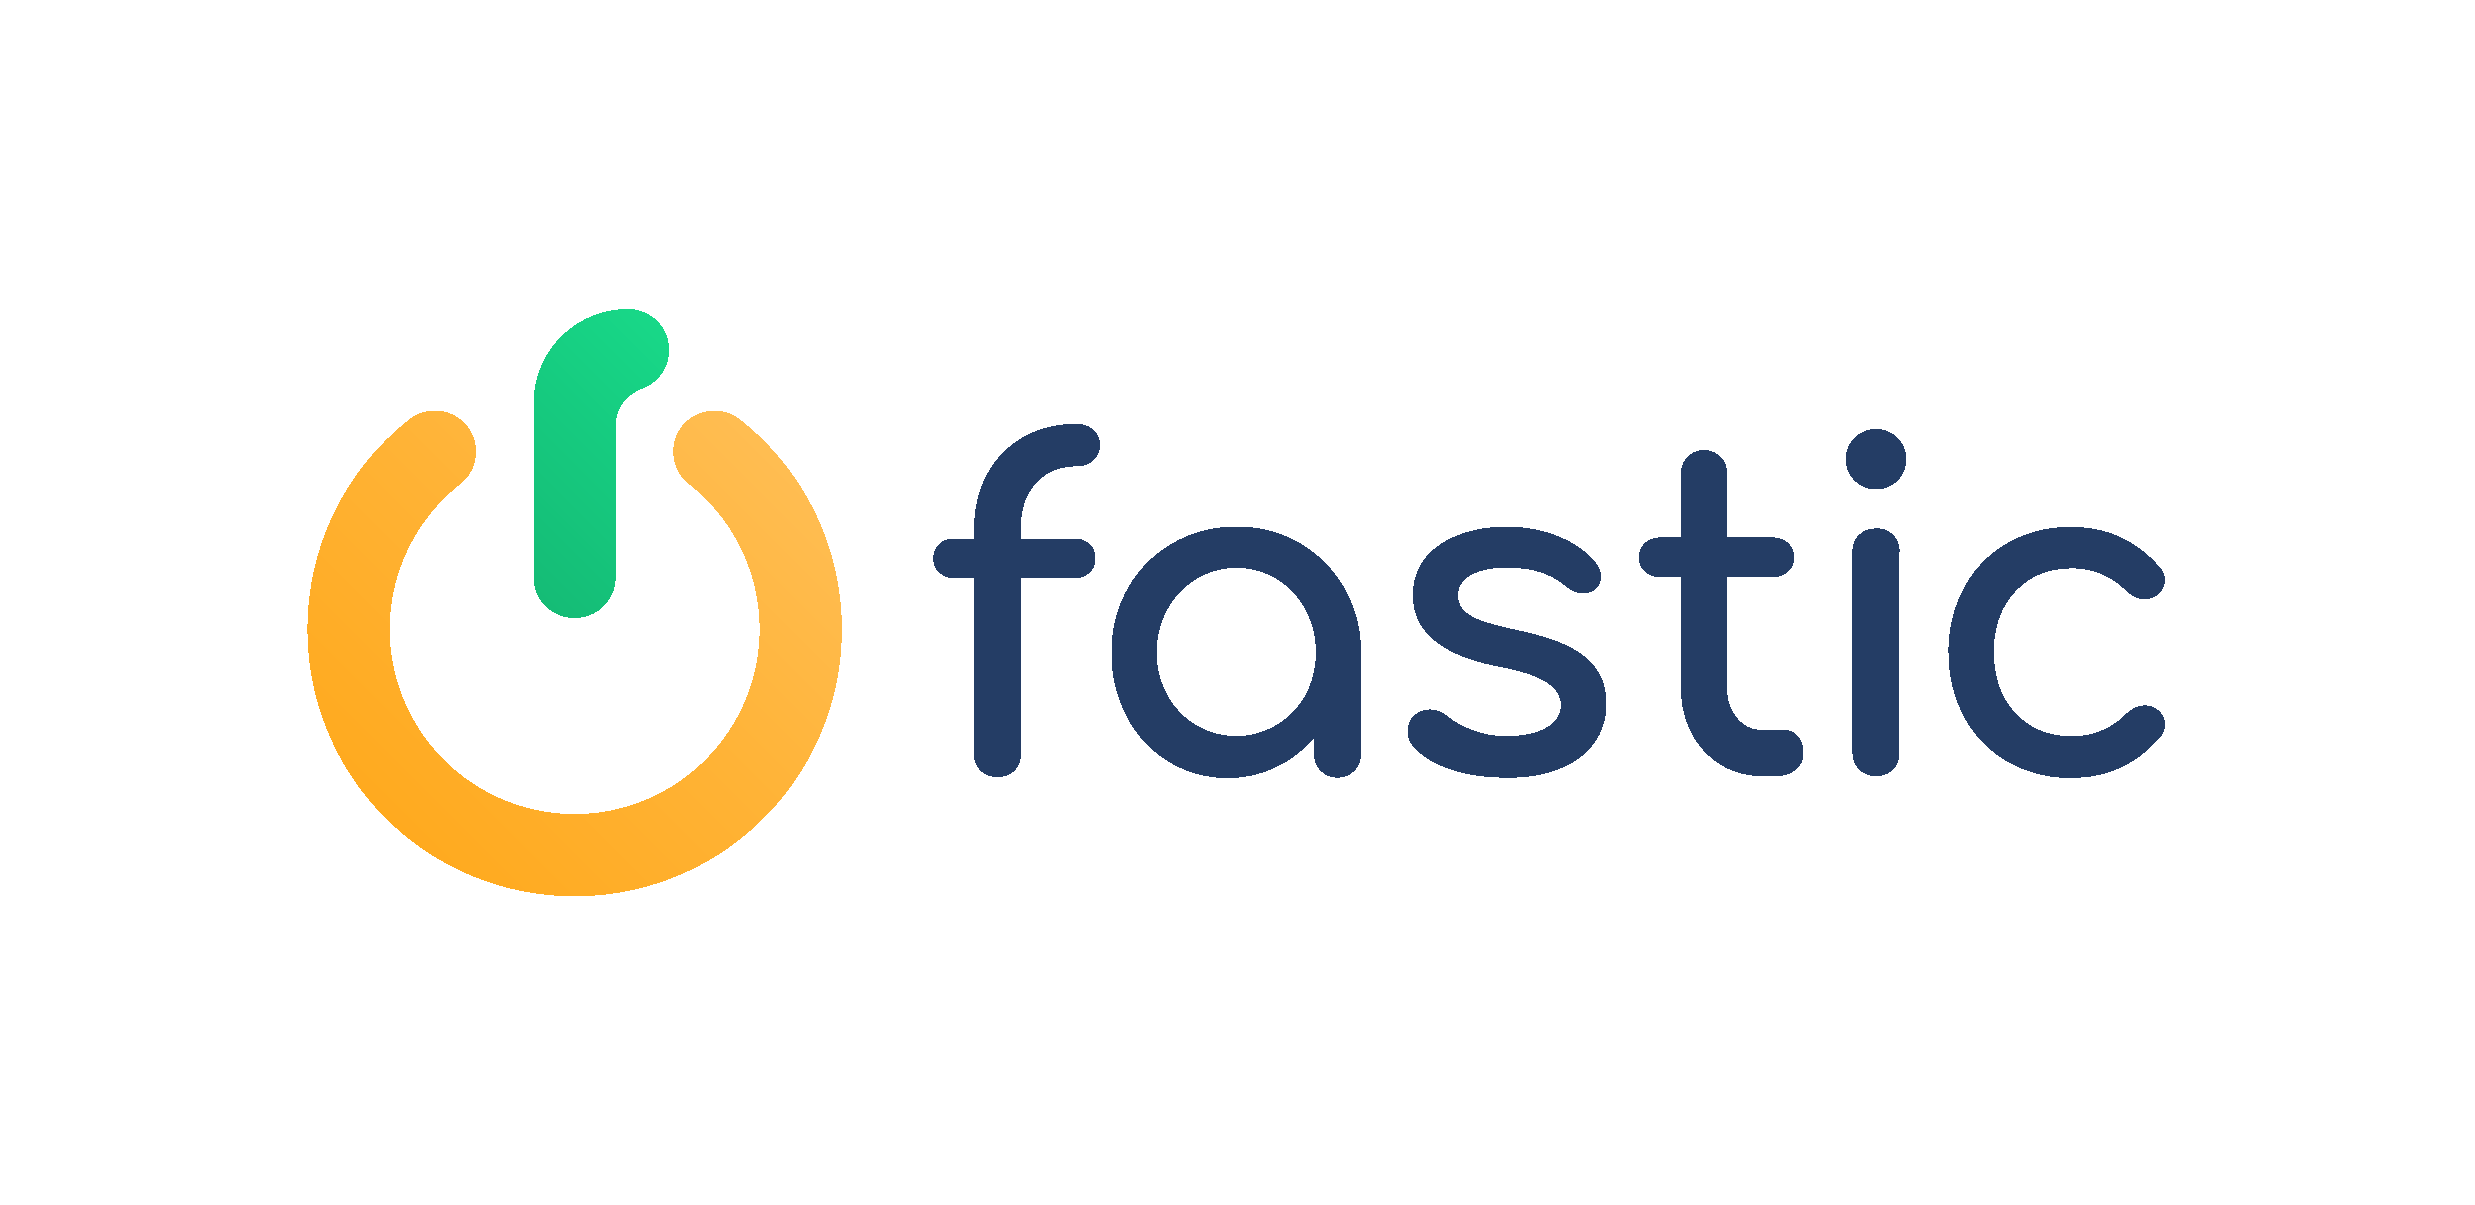 Get The Best Intermittent Fasting App For Free - Fastic Fasting Website